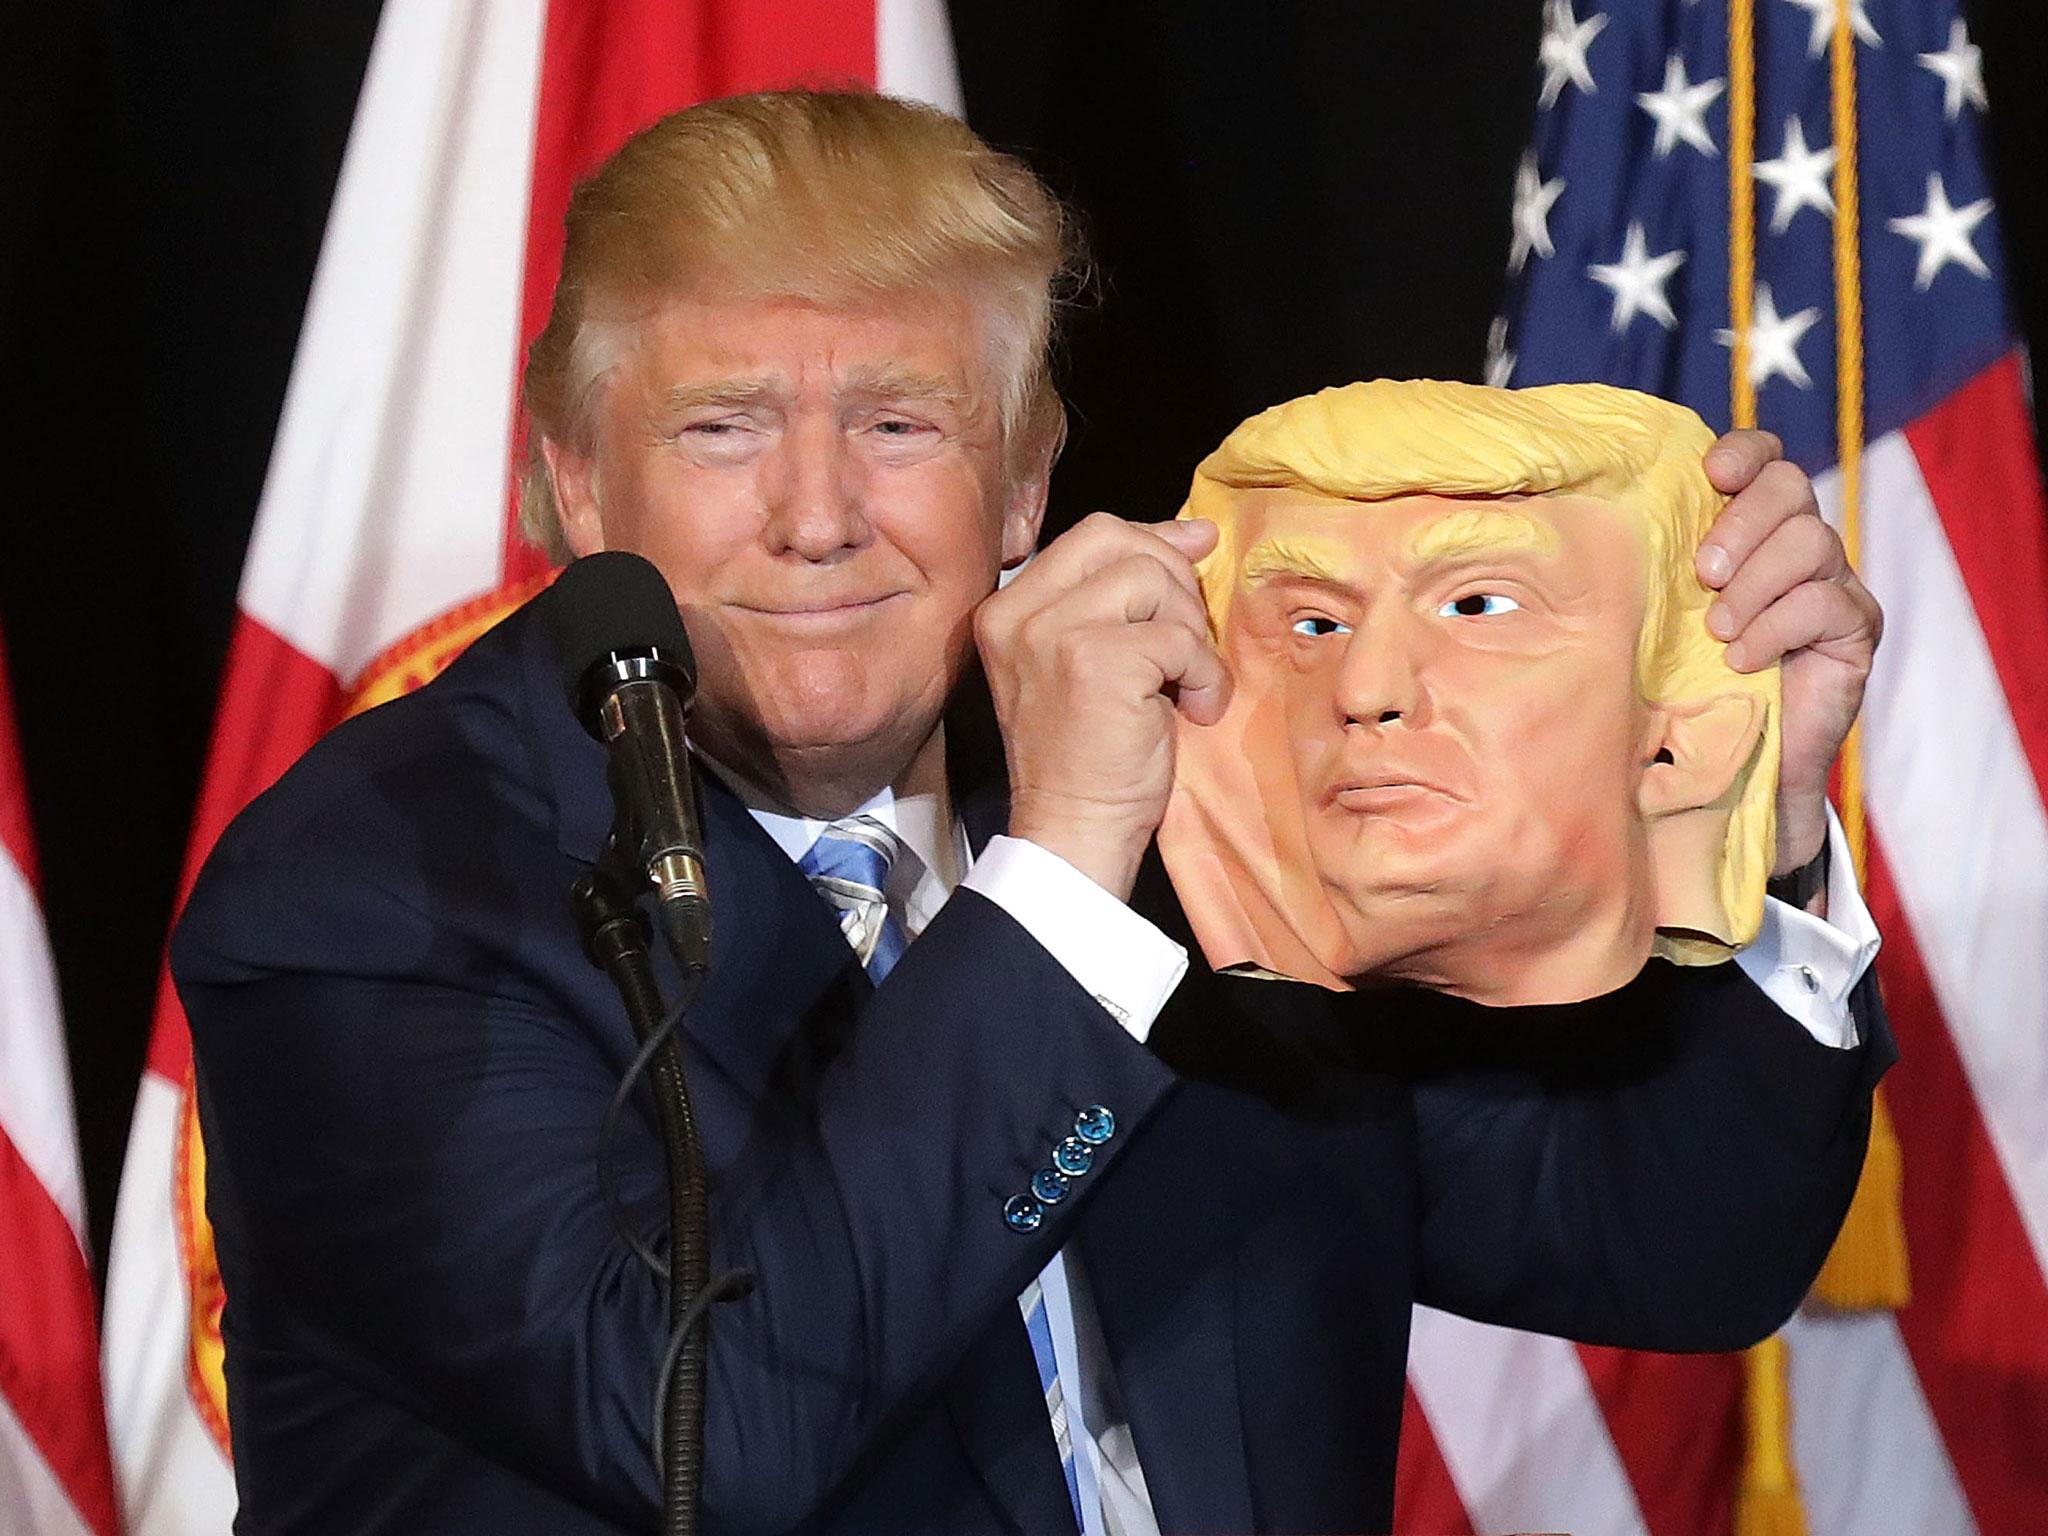 Donald Trump posing with a mask of his face tossed on stage by a supporter in Florida Chip Somodevilla/Getty